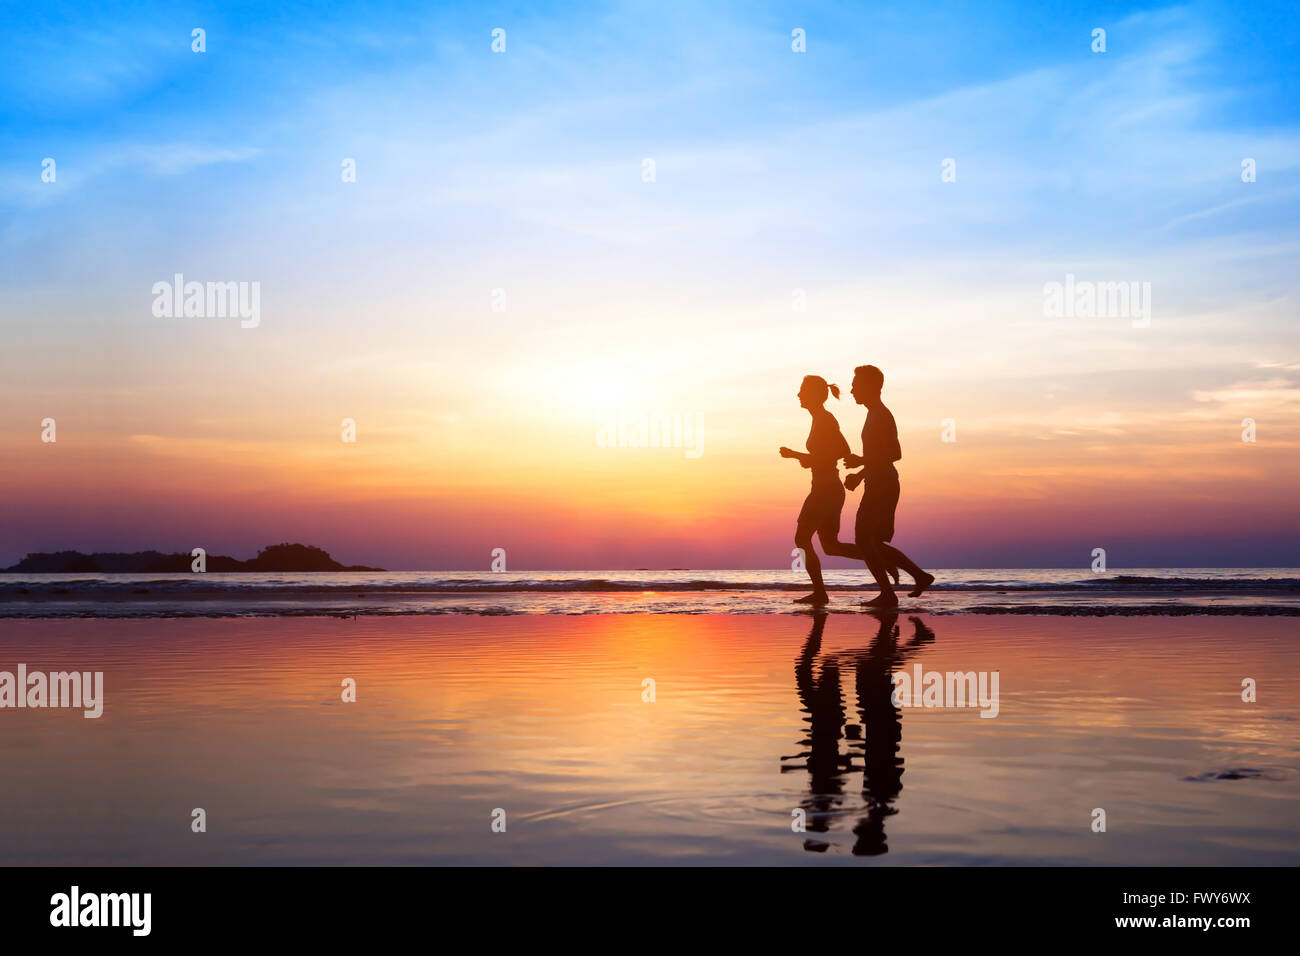 workout background, two people jogging on the beach at sunset, runners silhouettes, healthy lifestyle concept Stock Photo